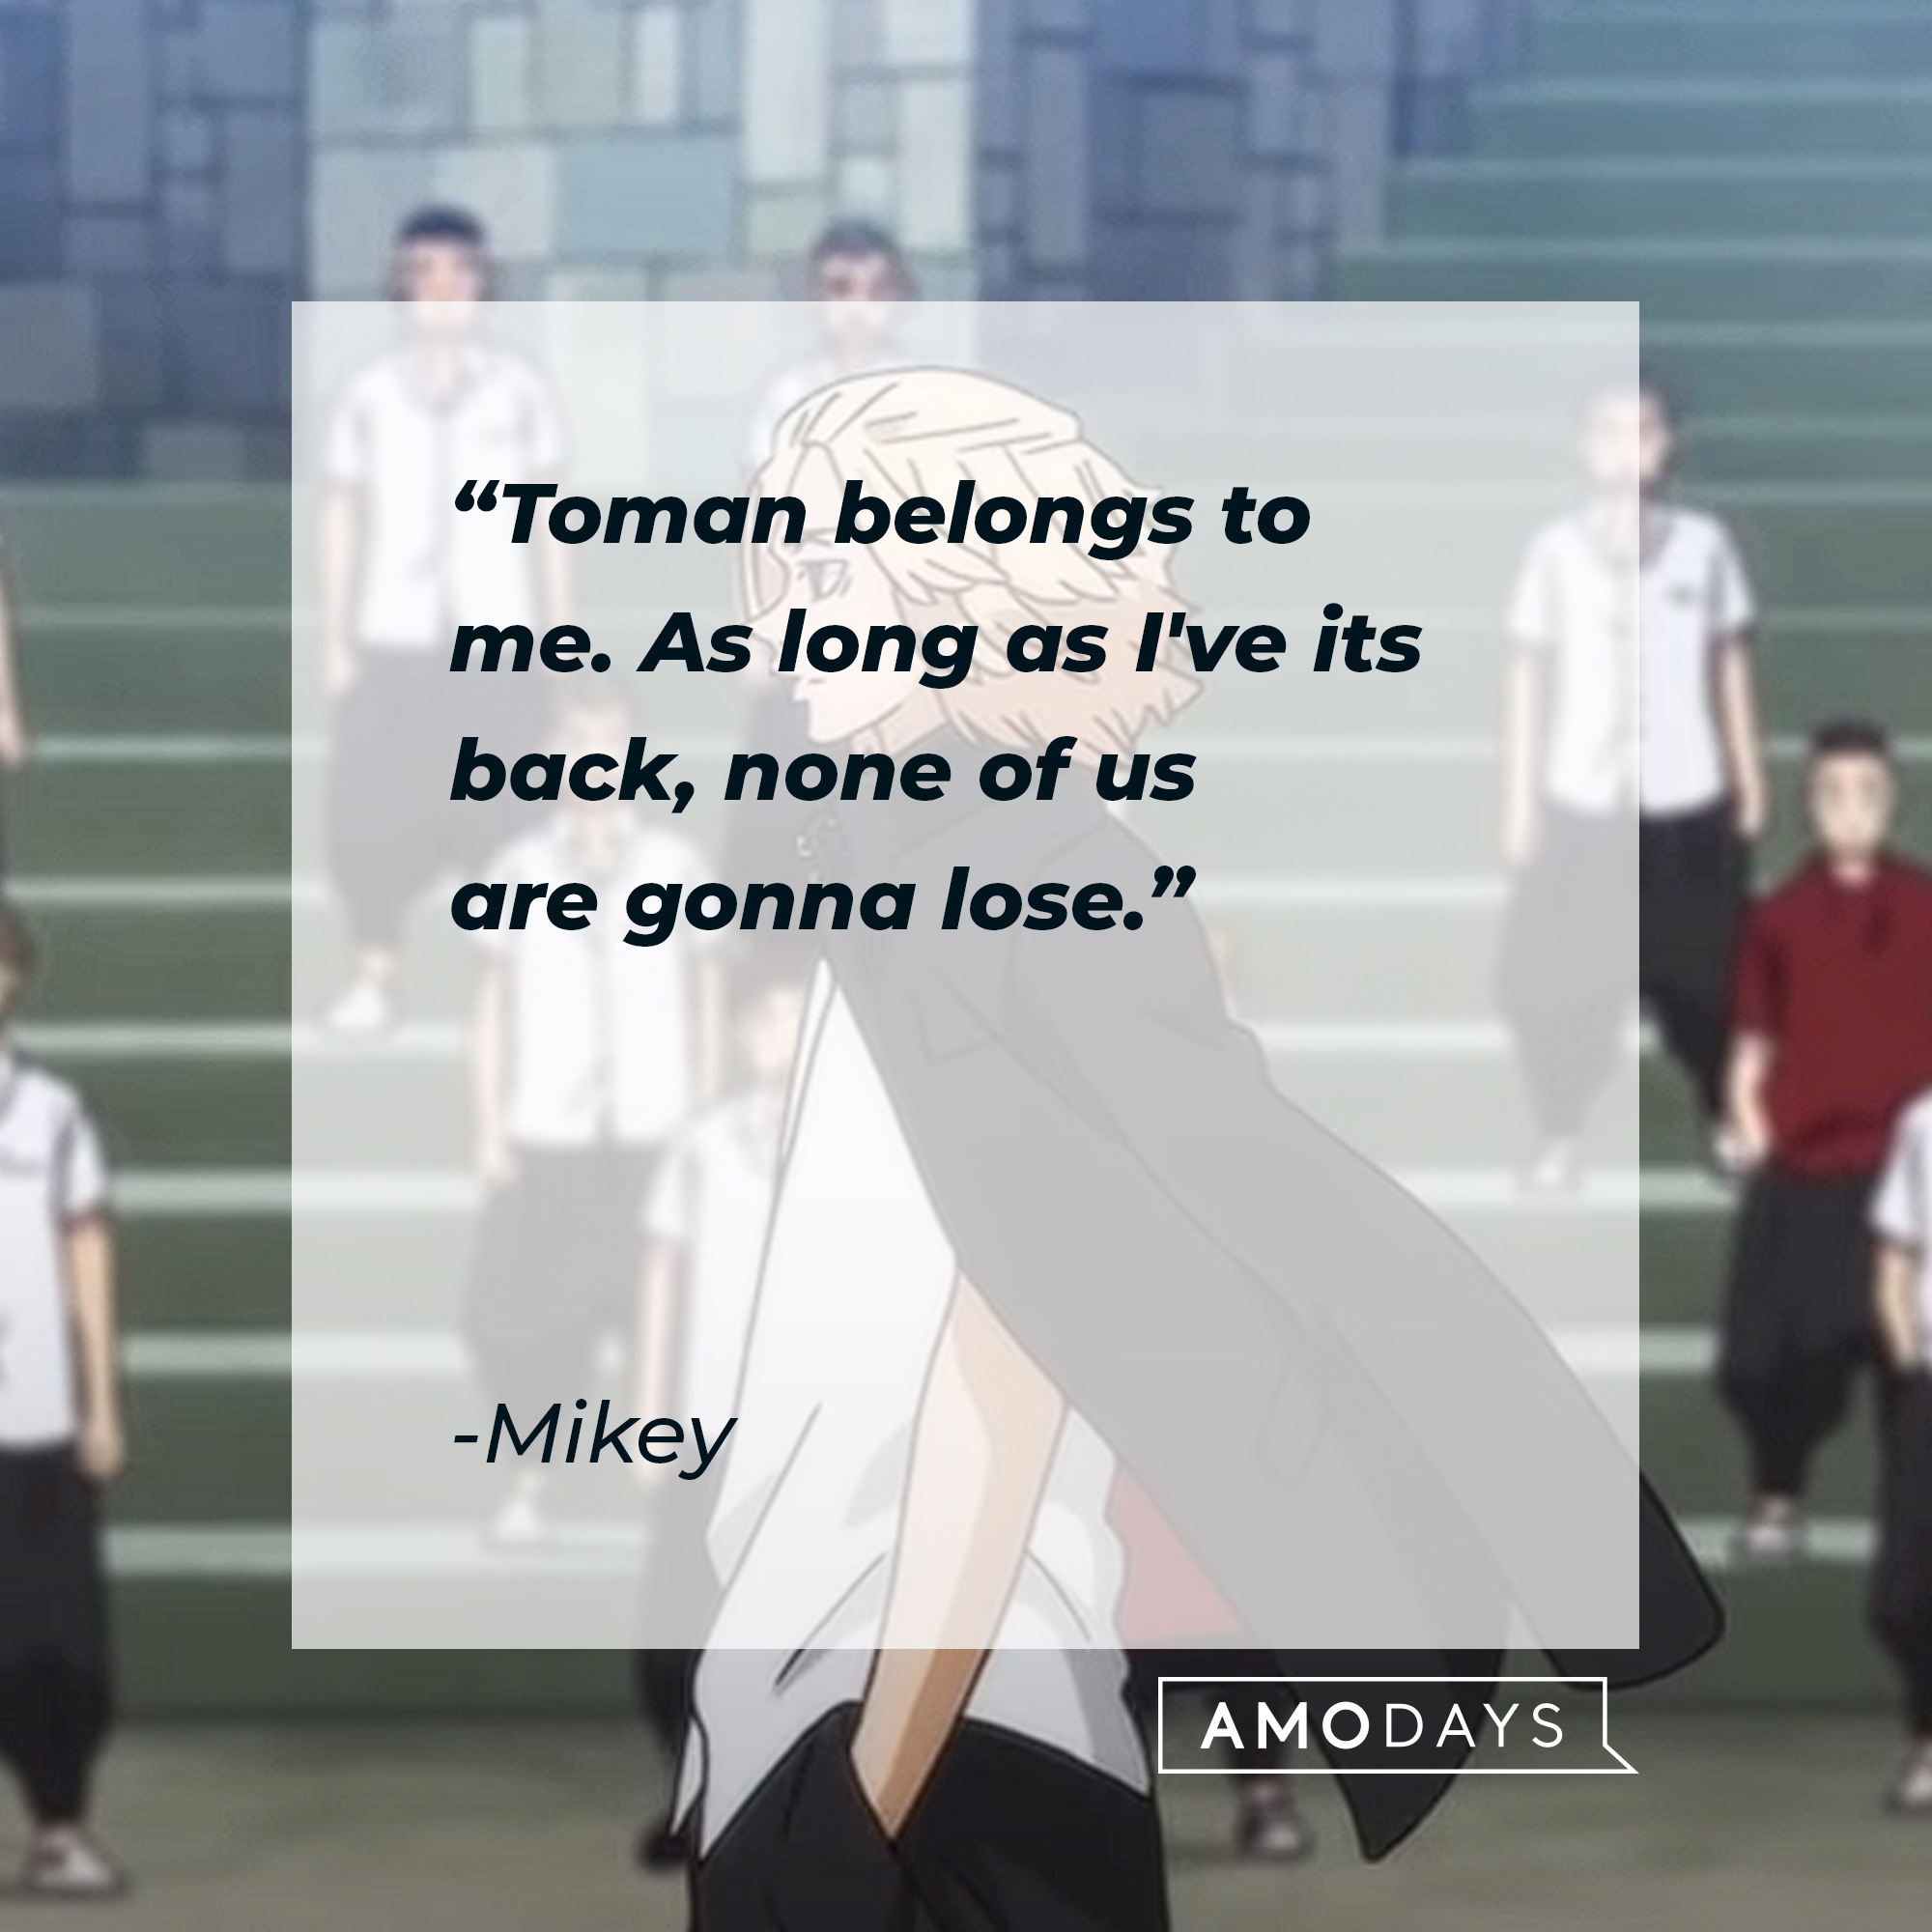 An image of Mikey with his quote: “Toman belongs to me. As long as I've its back, none of us are gonna lose.” | Source: youtube.com/CrunchyrollCollection